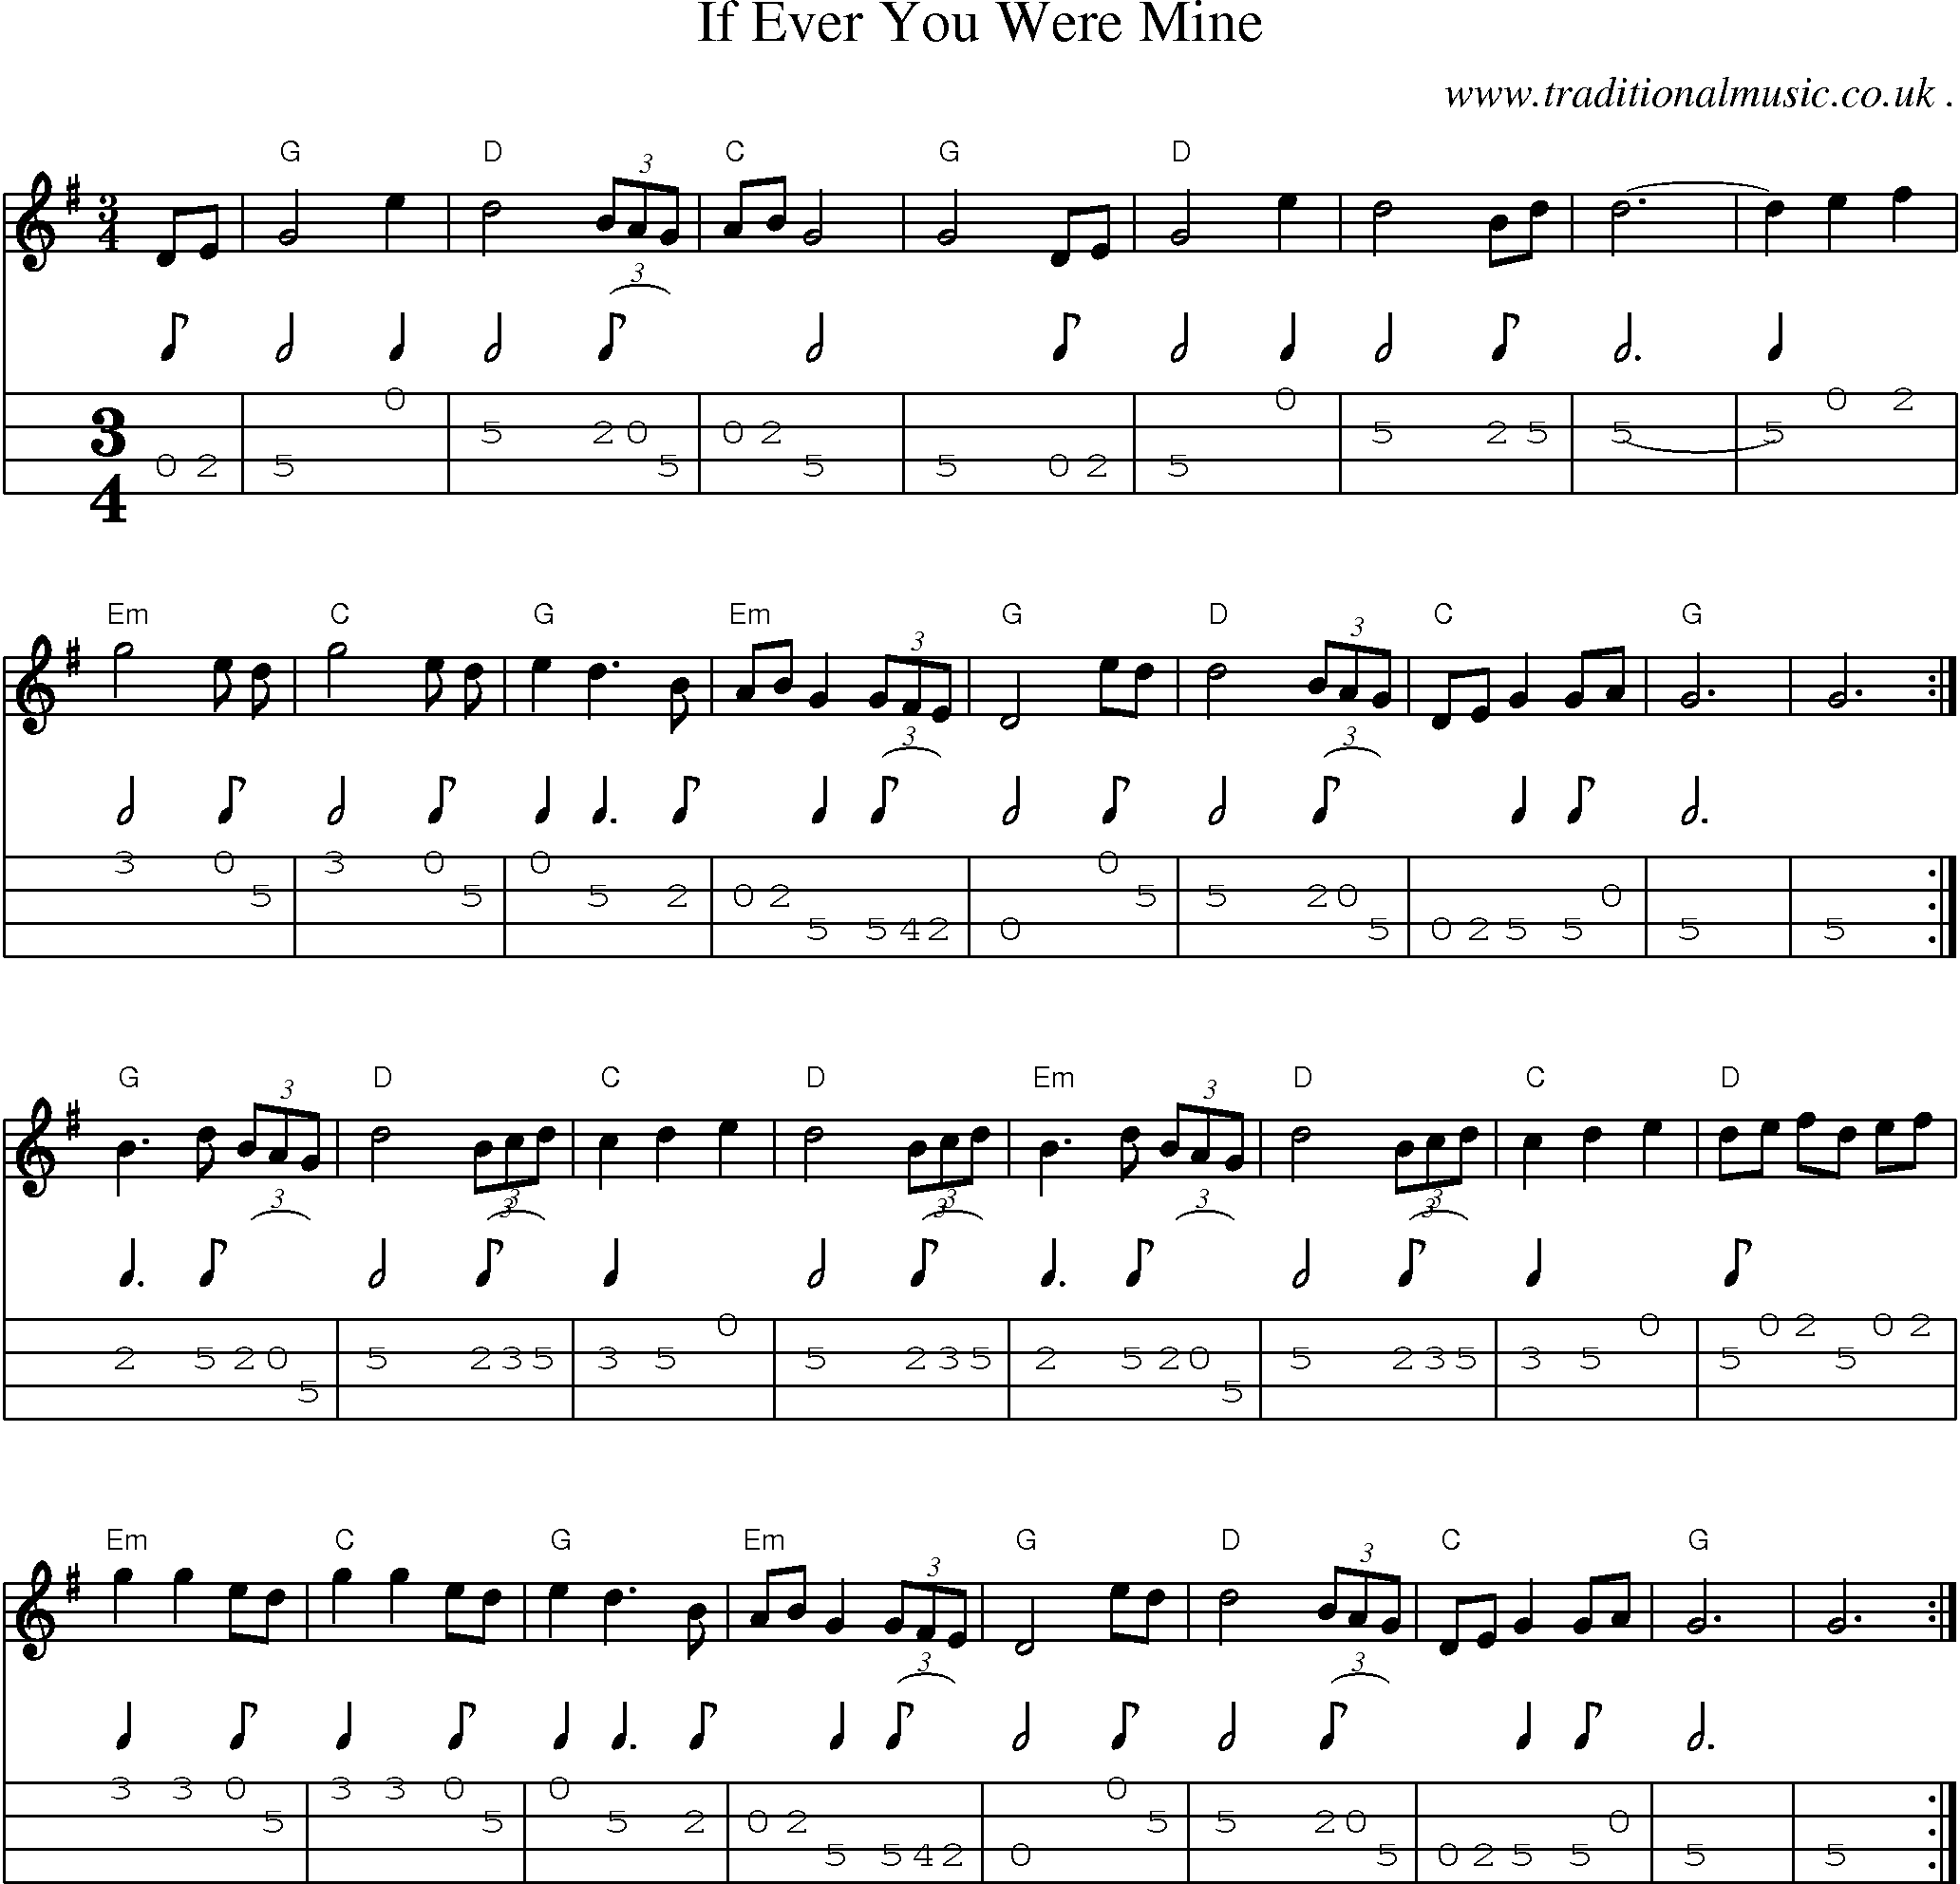 Music Score and Guitar Tabs for If Ever You Were Mine